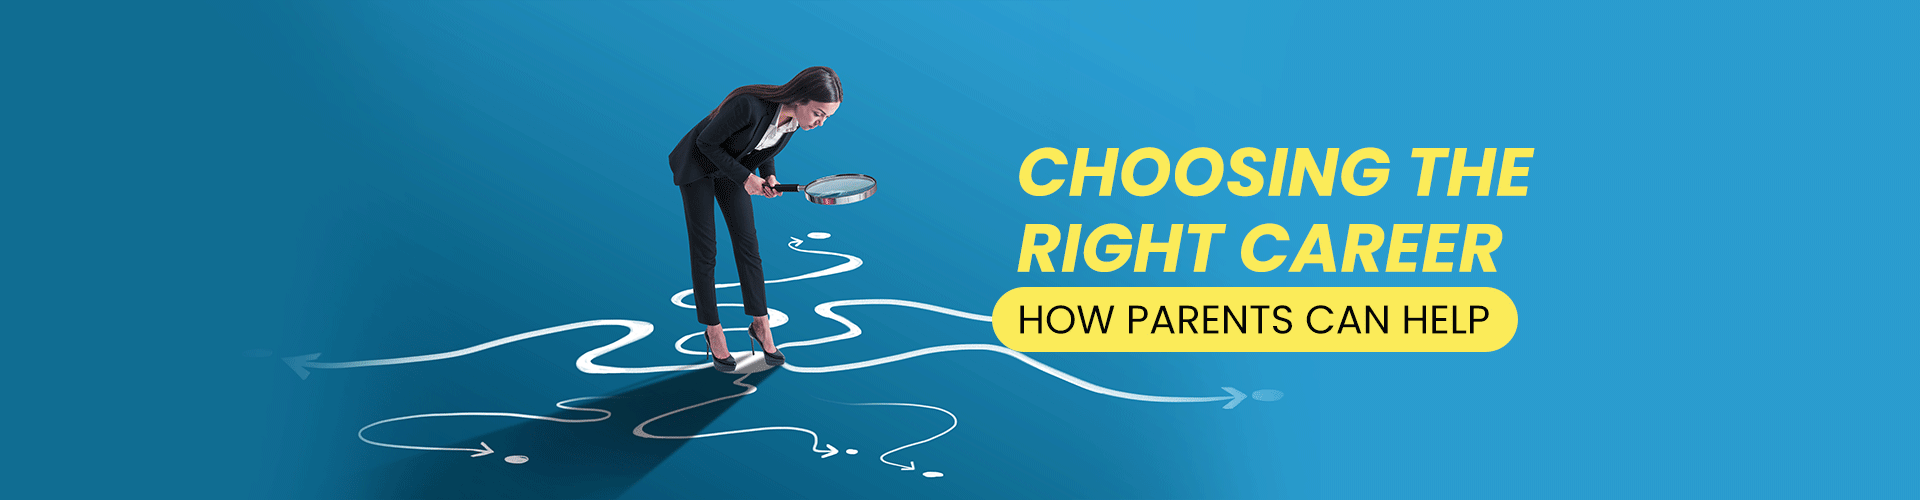 How Parents Can Help In Choosing the Right Career